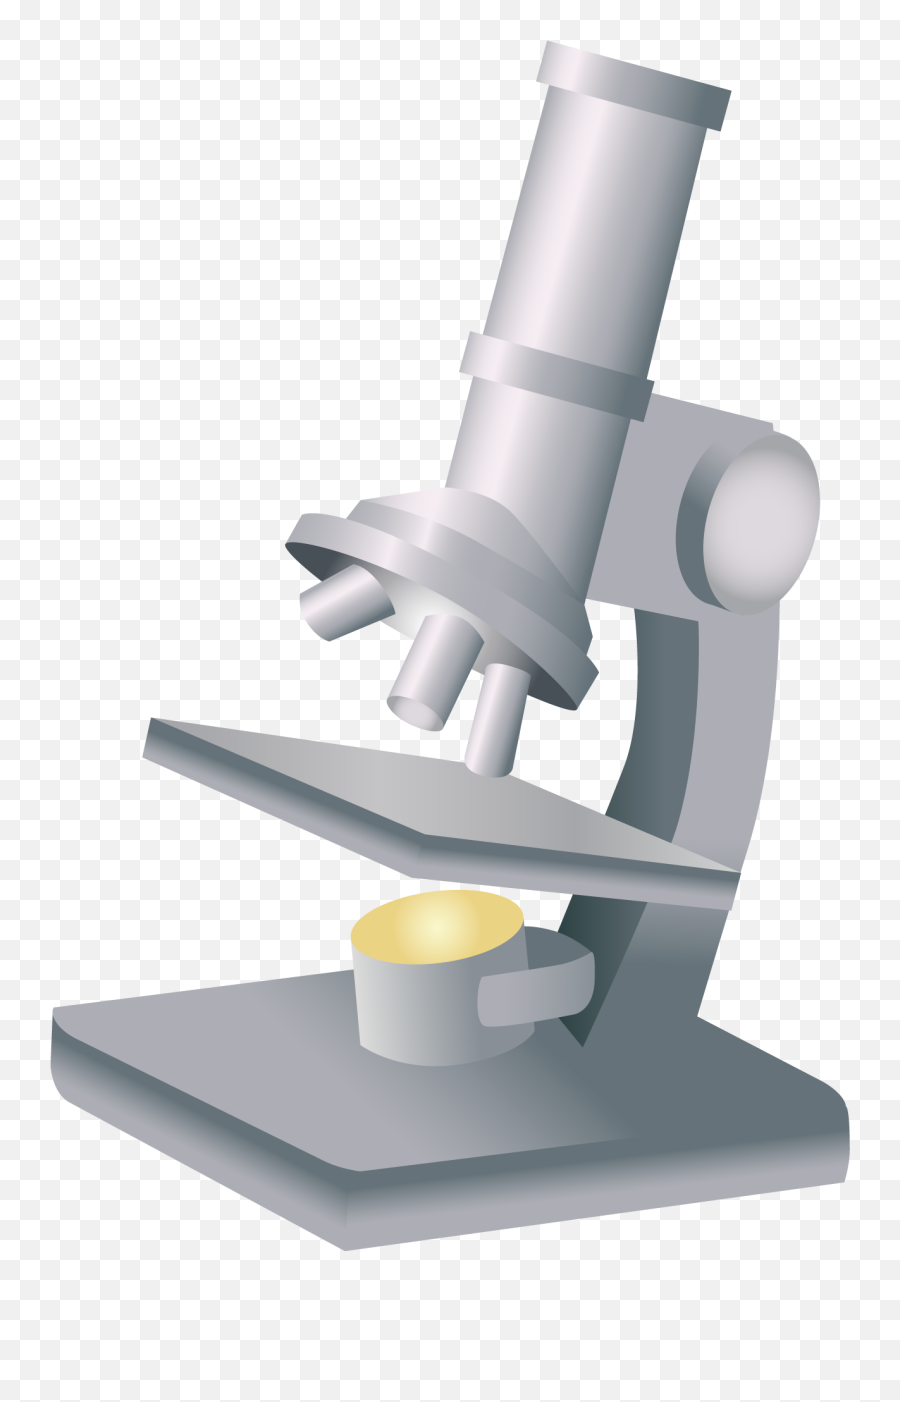 Download Microscope Png Image For Free - Portable Network Graphics,Microscope Transparent Background